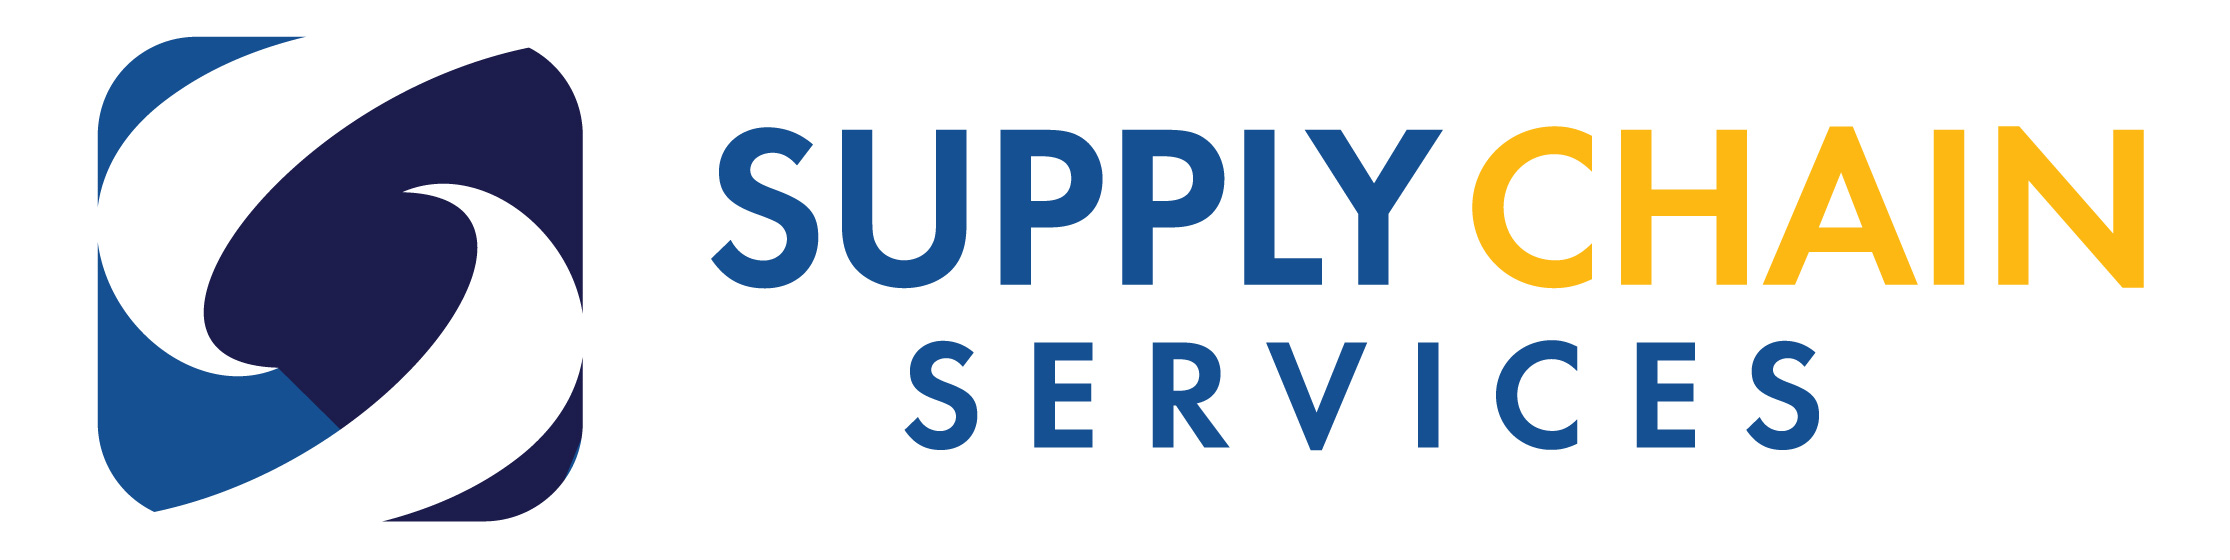 blue and yellow logo for Supply Chain Services